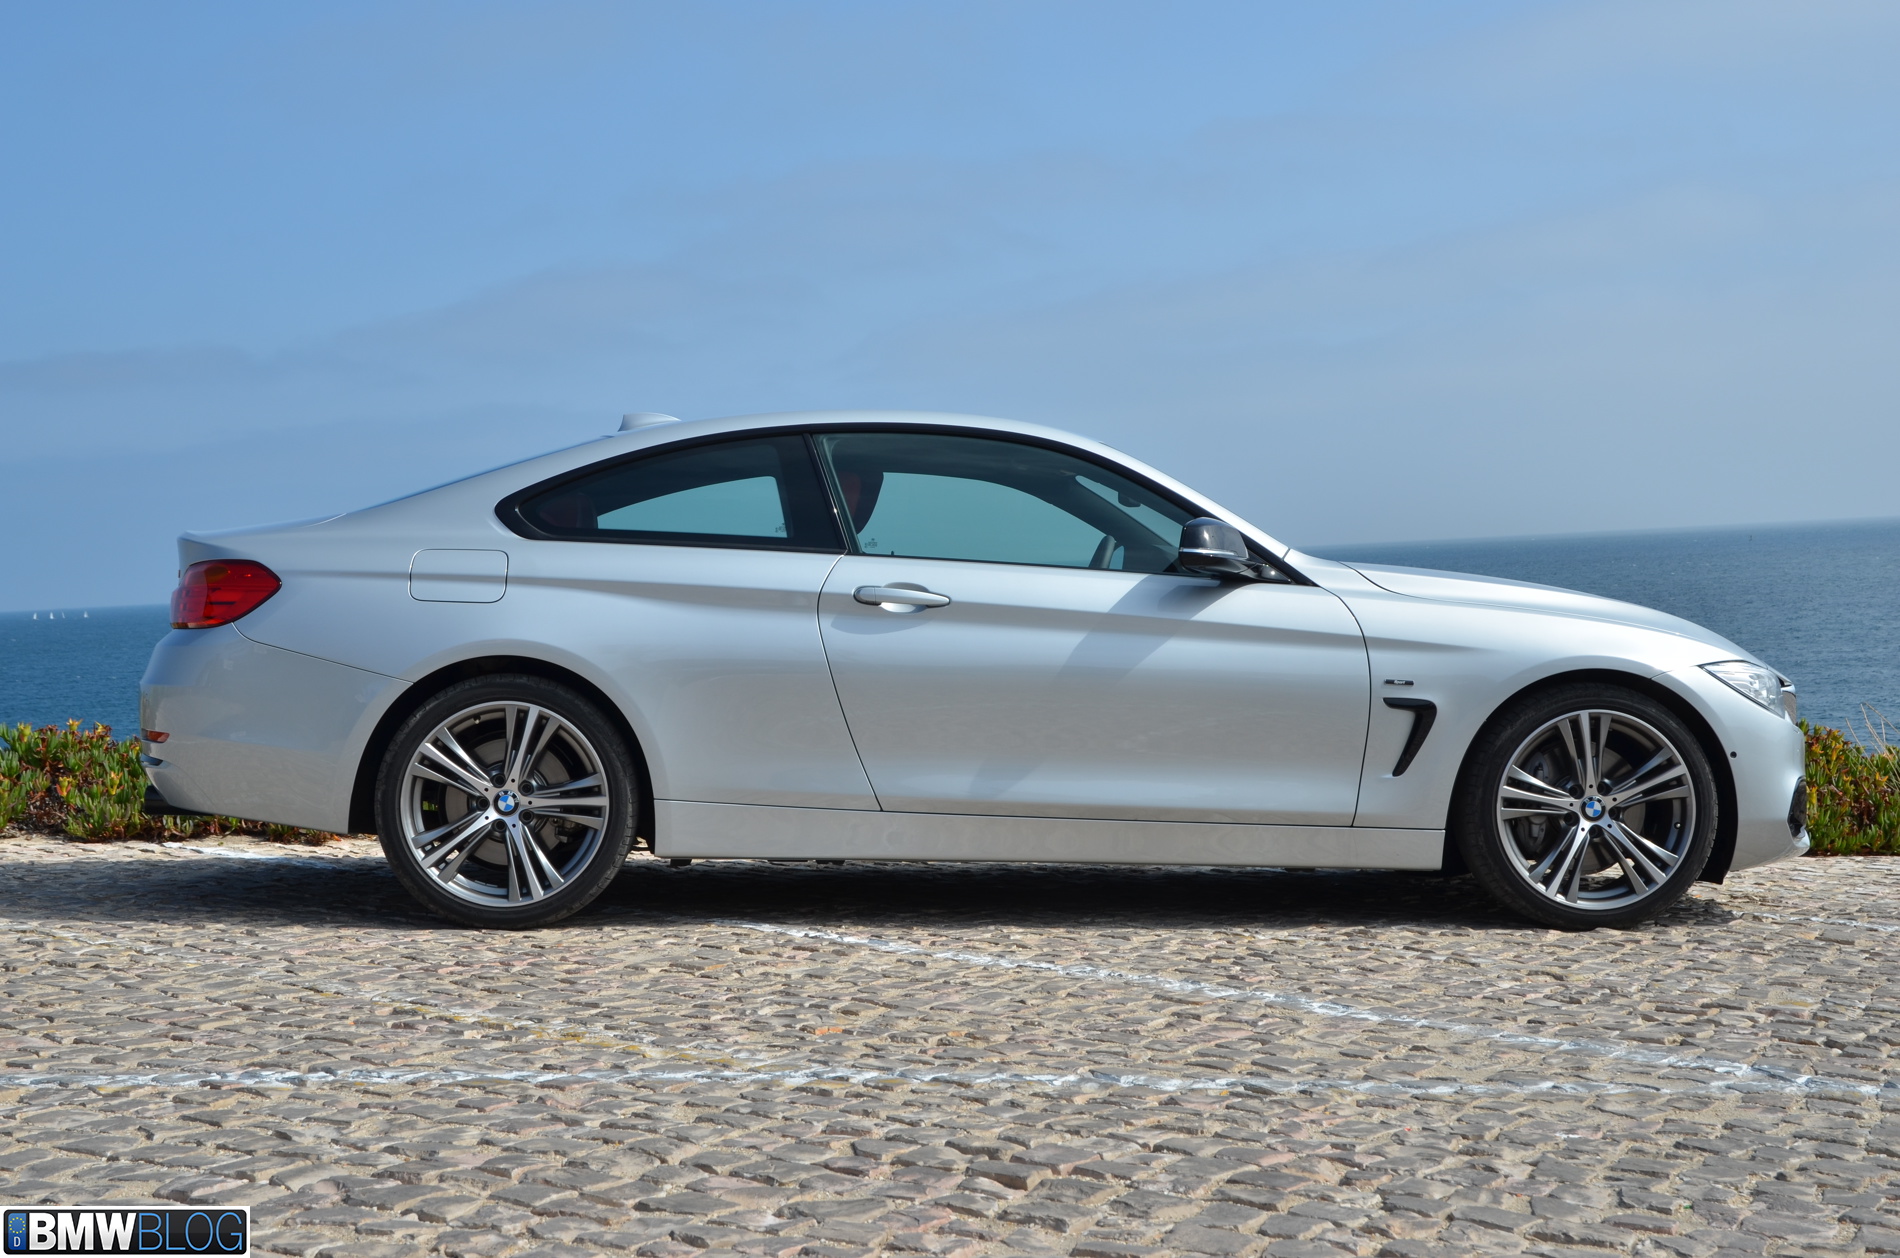 2014 BMW 428i - Video Review